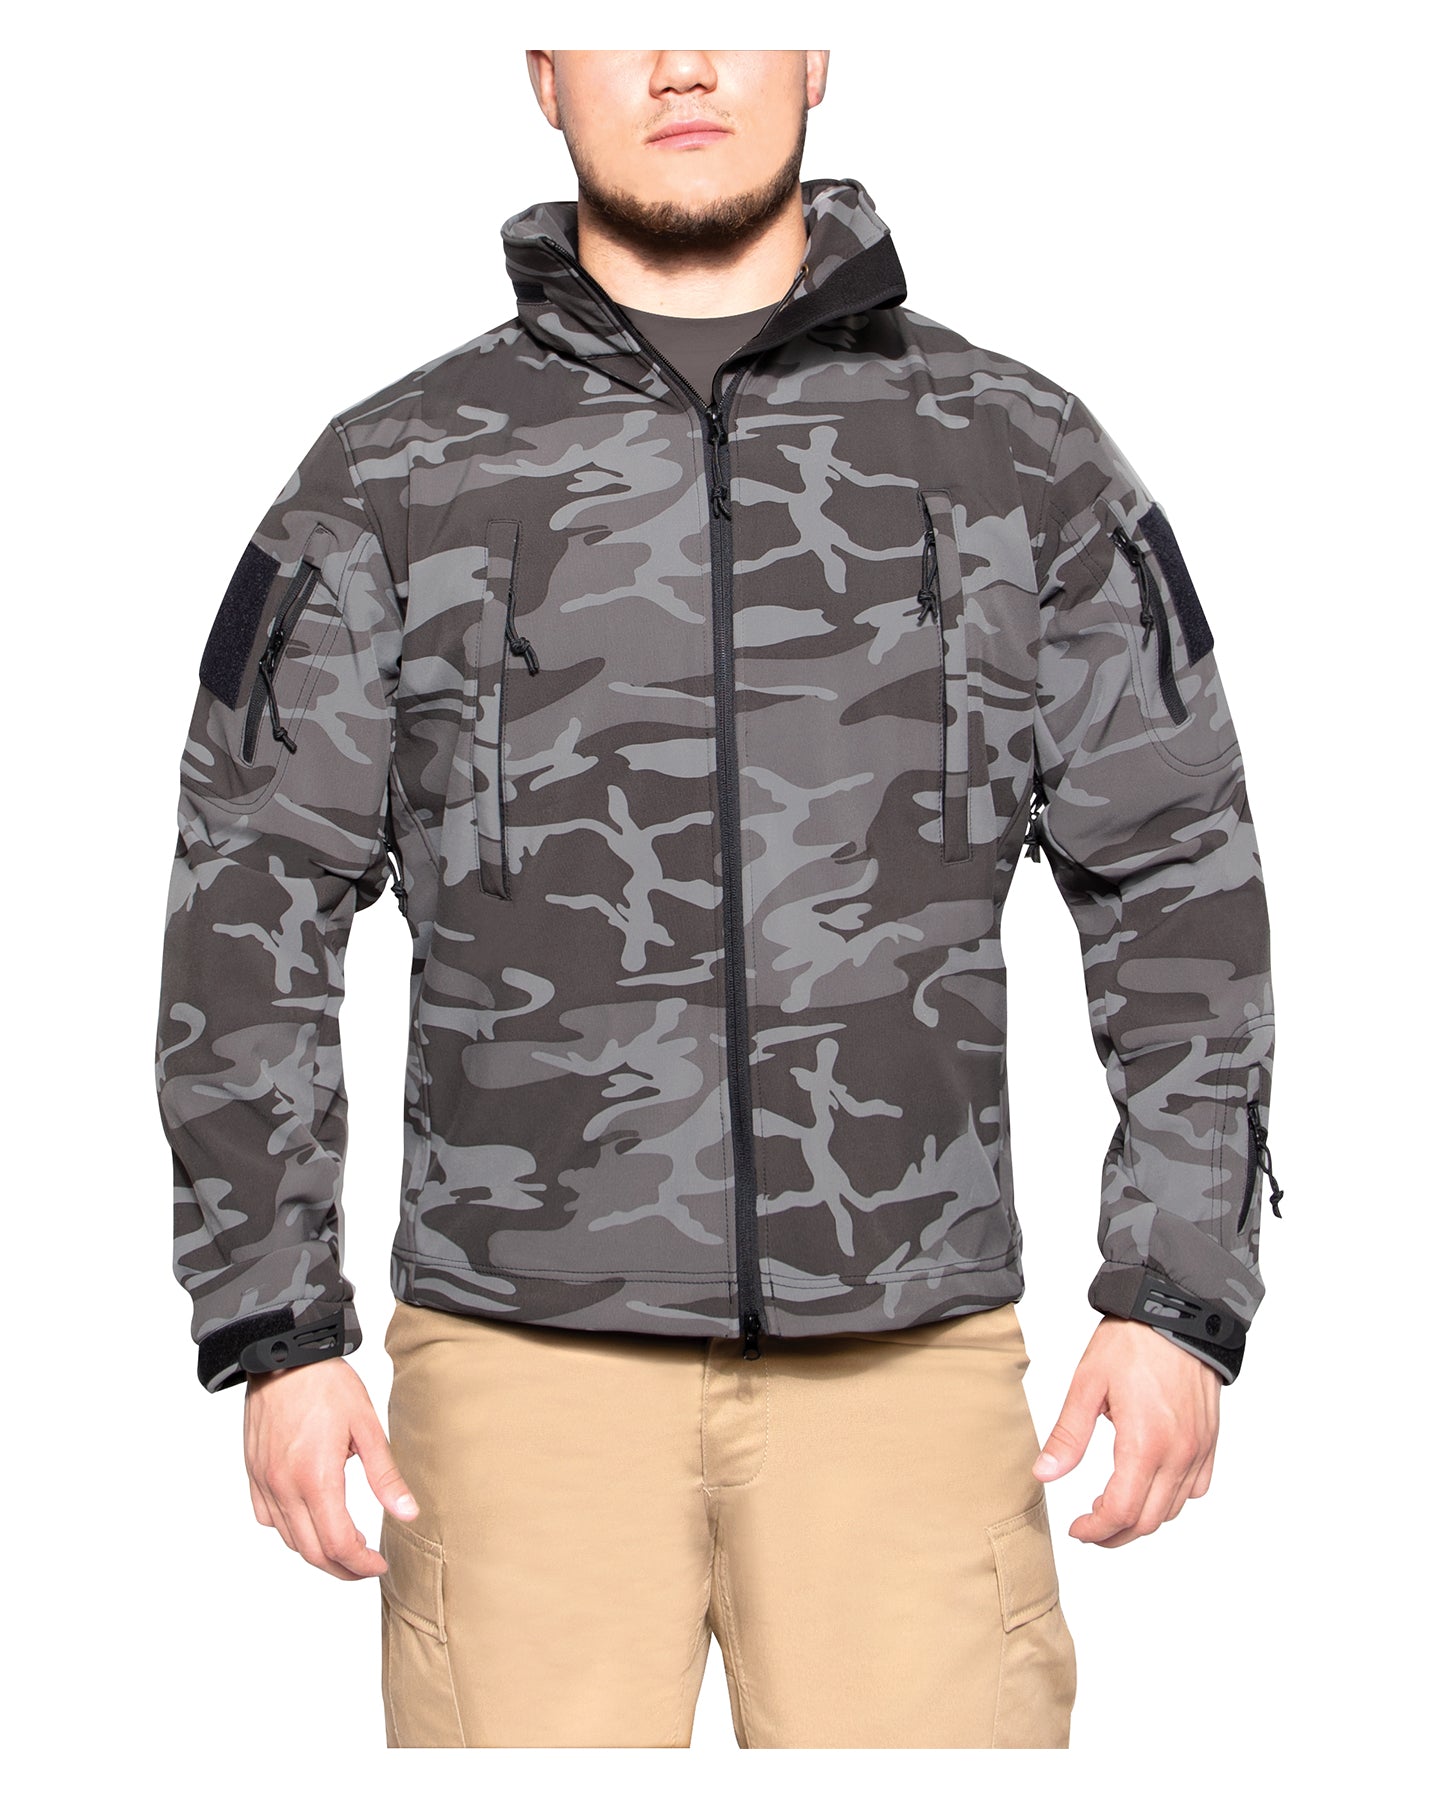 Rothco Special Ops Tactical Soft Shell Jacket - Black Camo